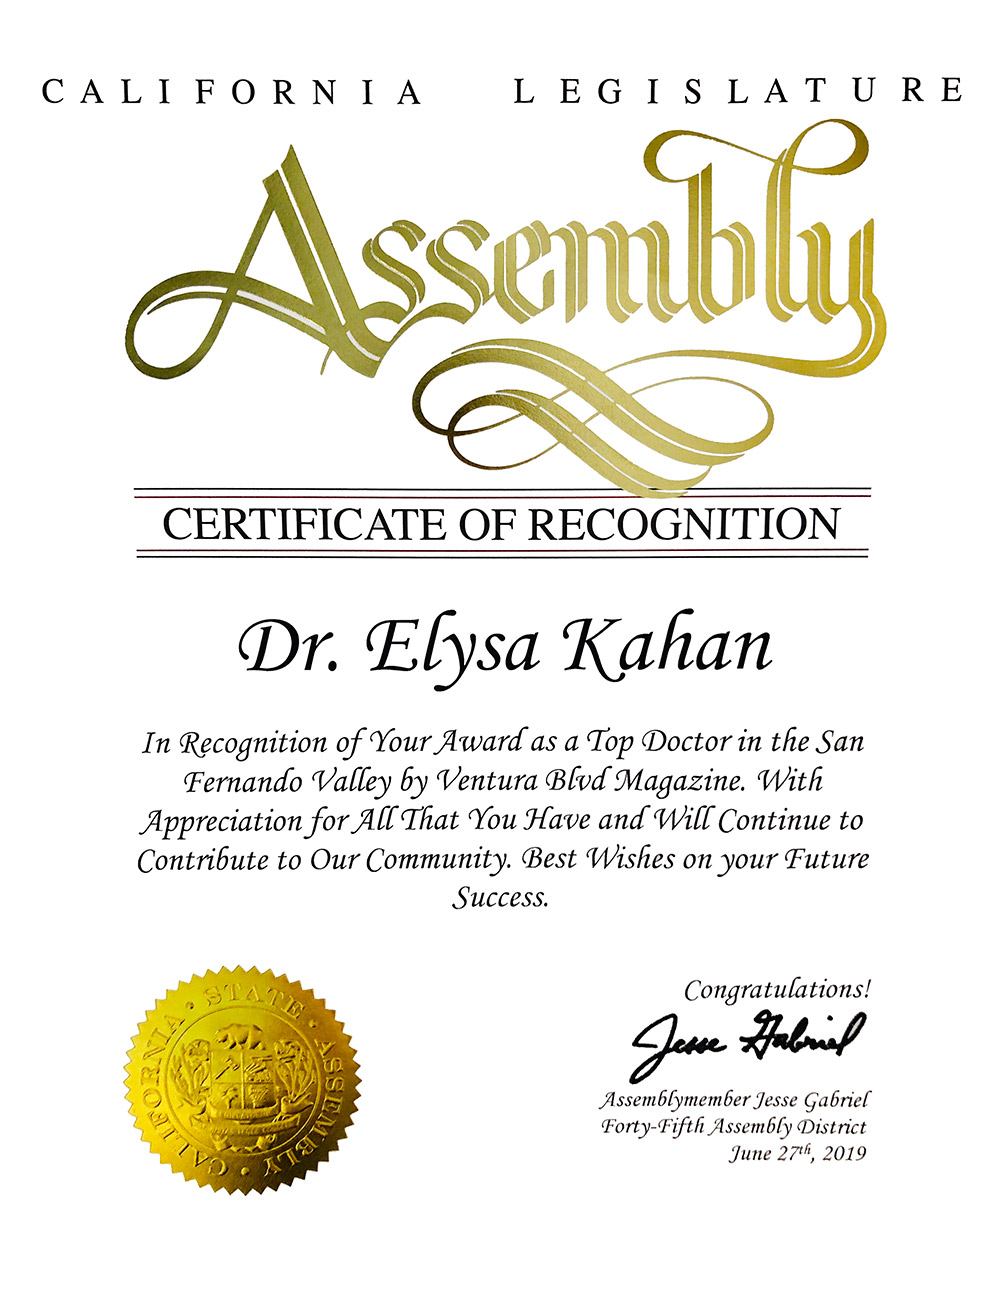 ca state assembly | kahan orthodontics